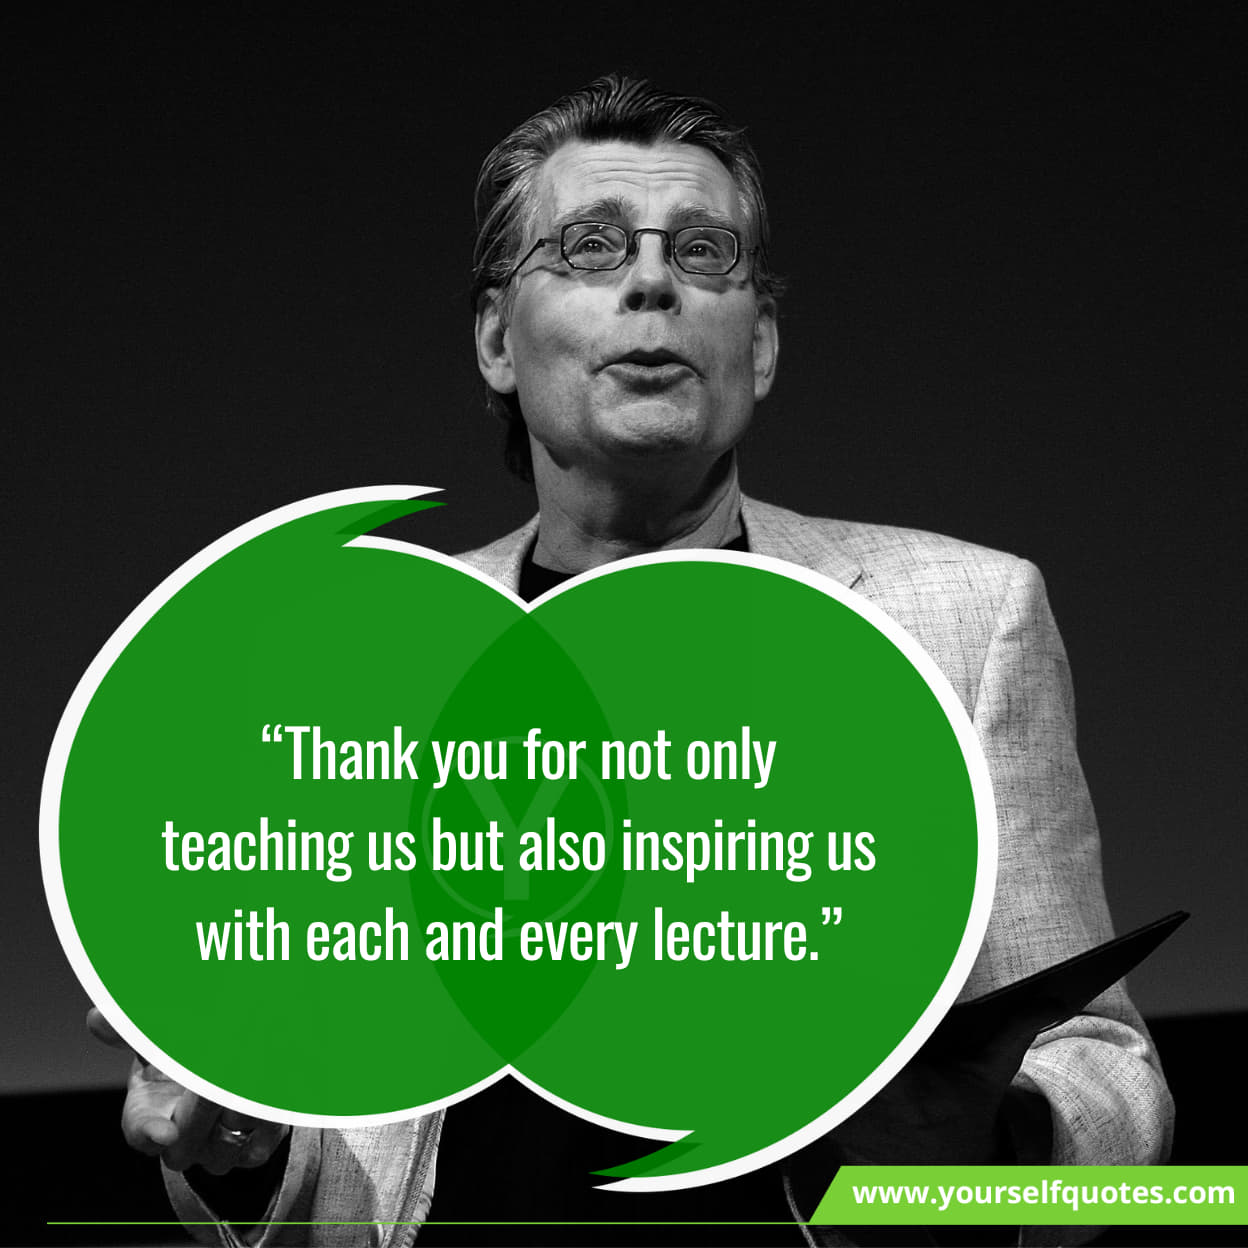 Quotes To Say Thank You For Professor